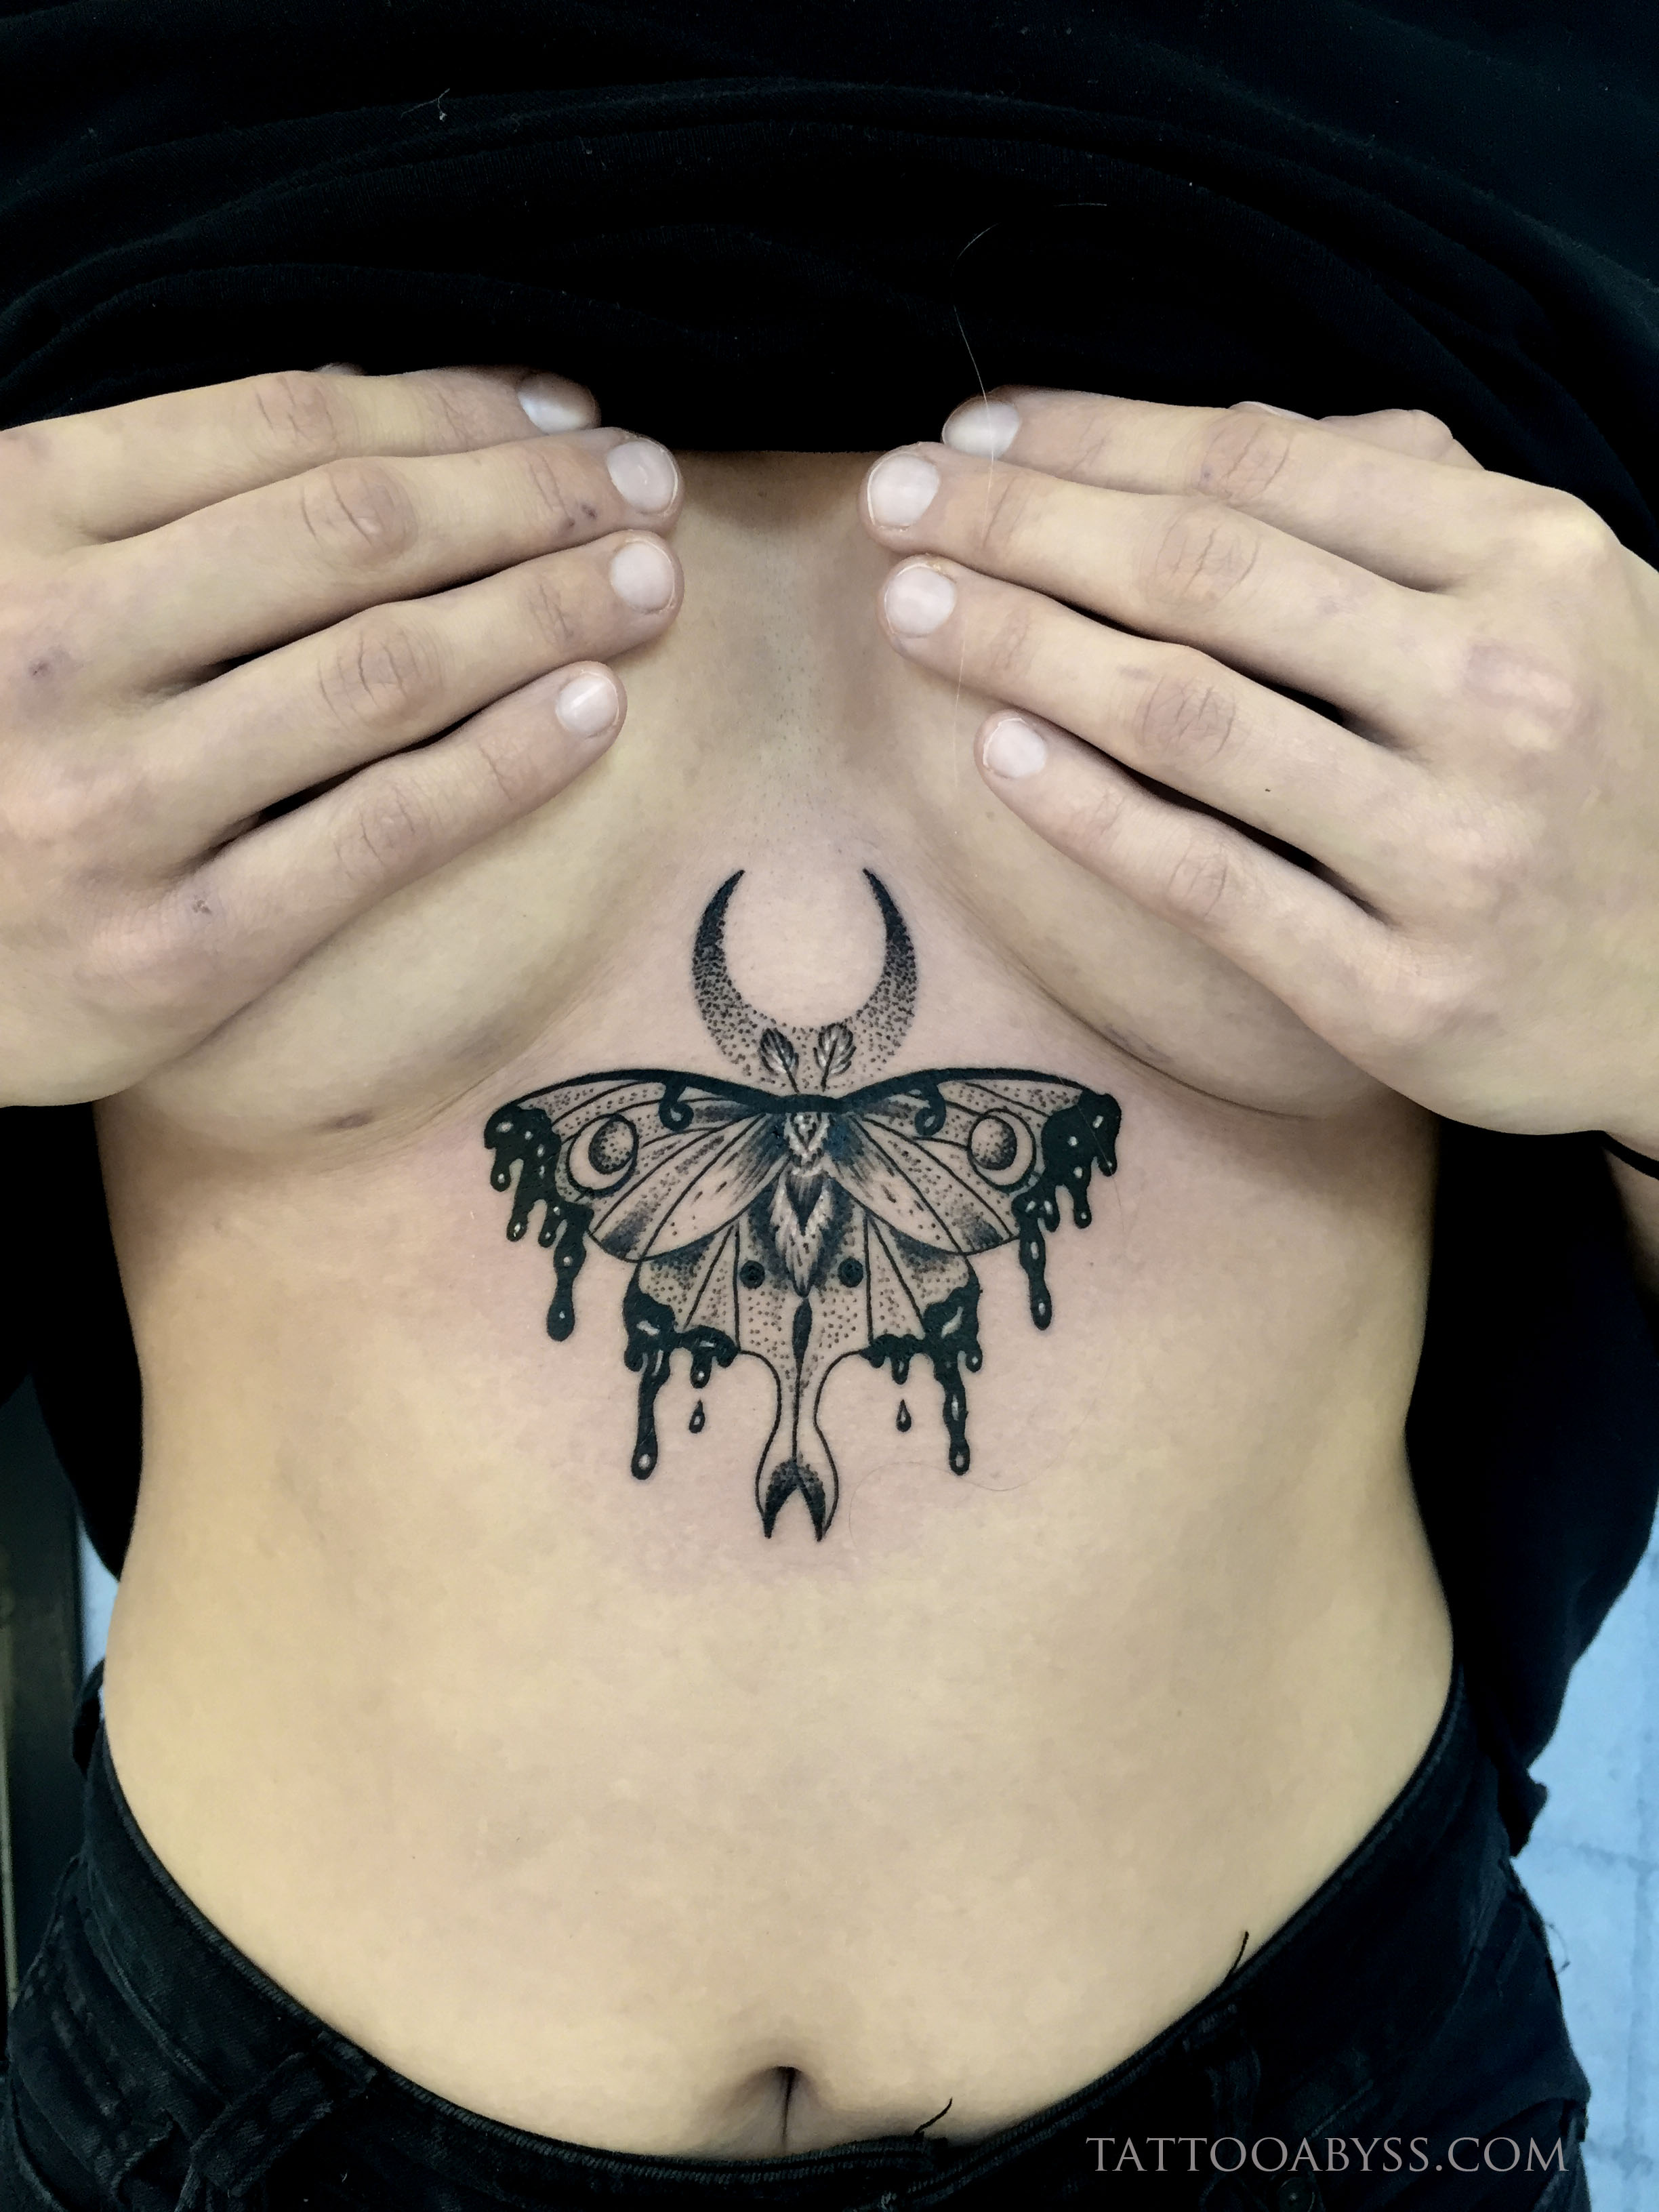 Moth Moon done by Abby at Tattoo Abyss in Griffintown, Montreal. 